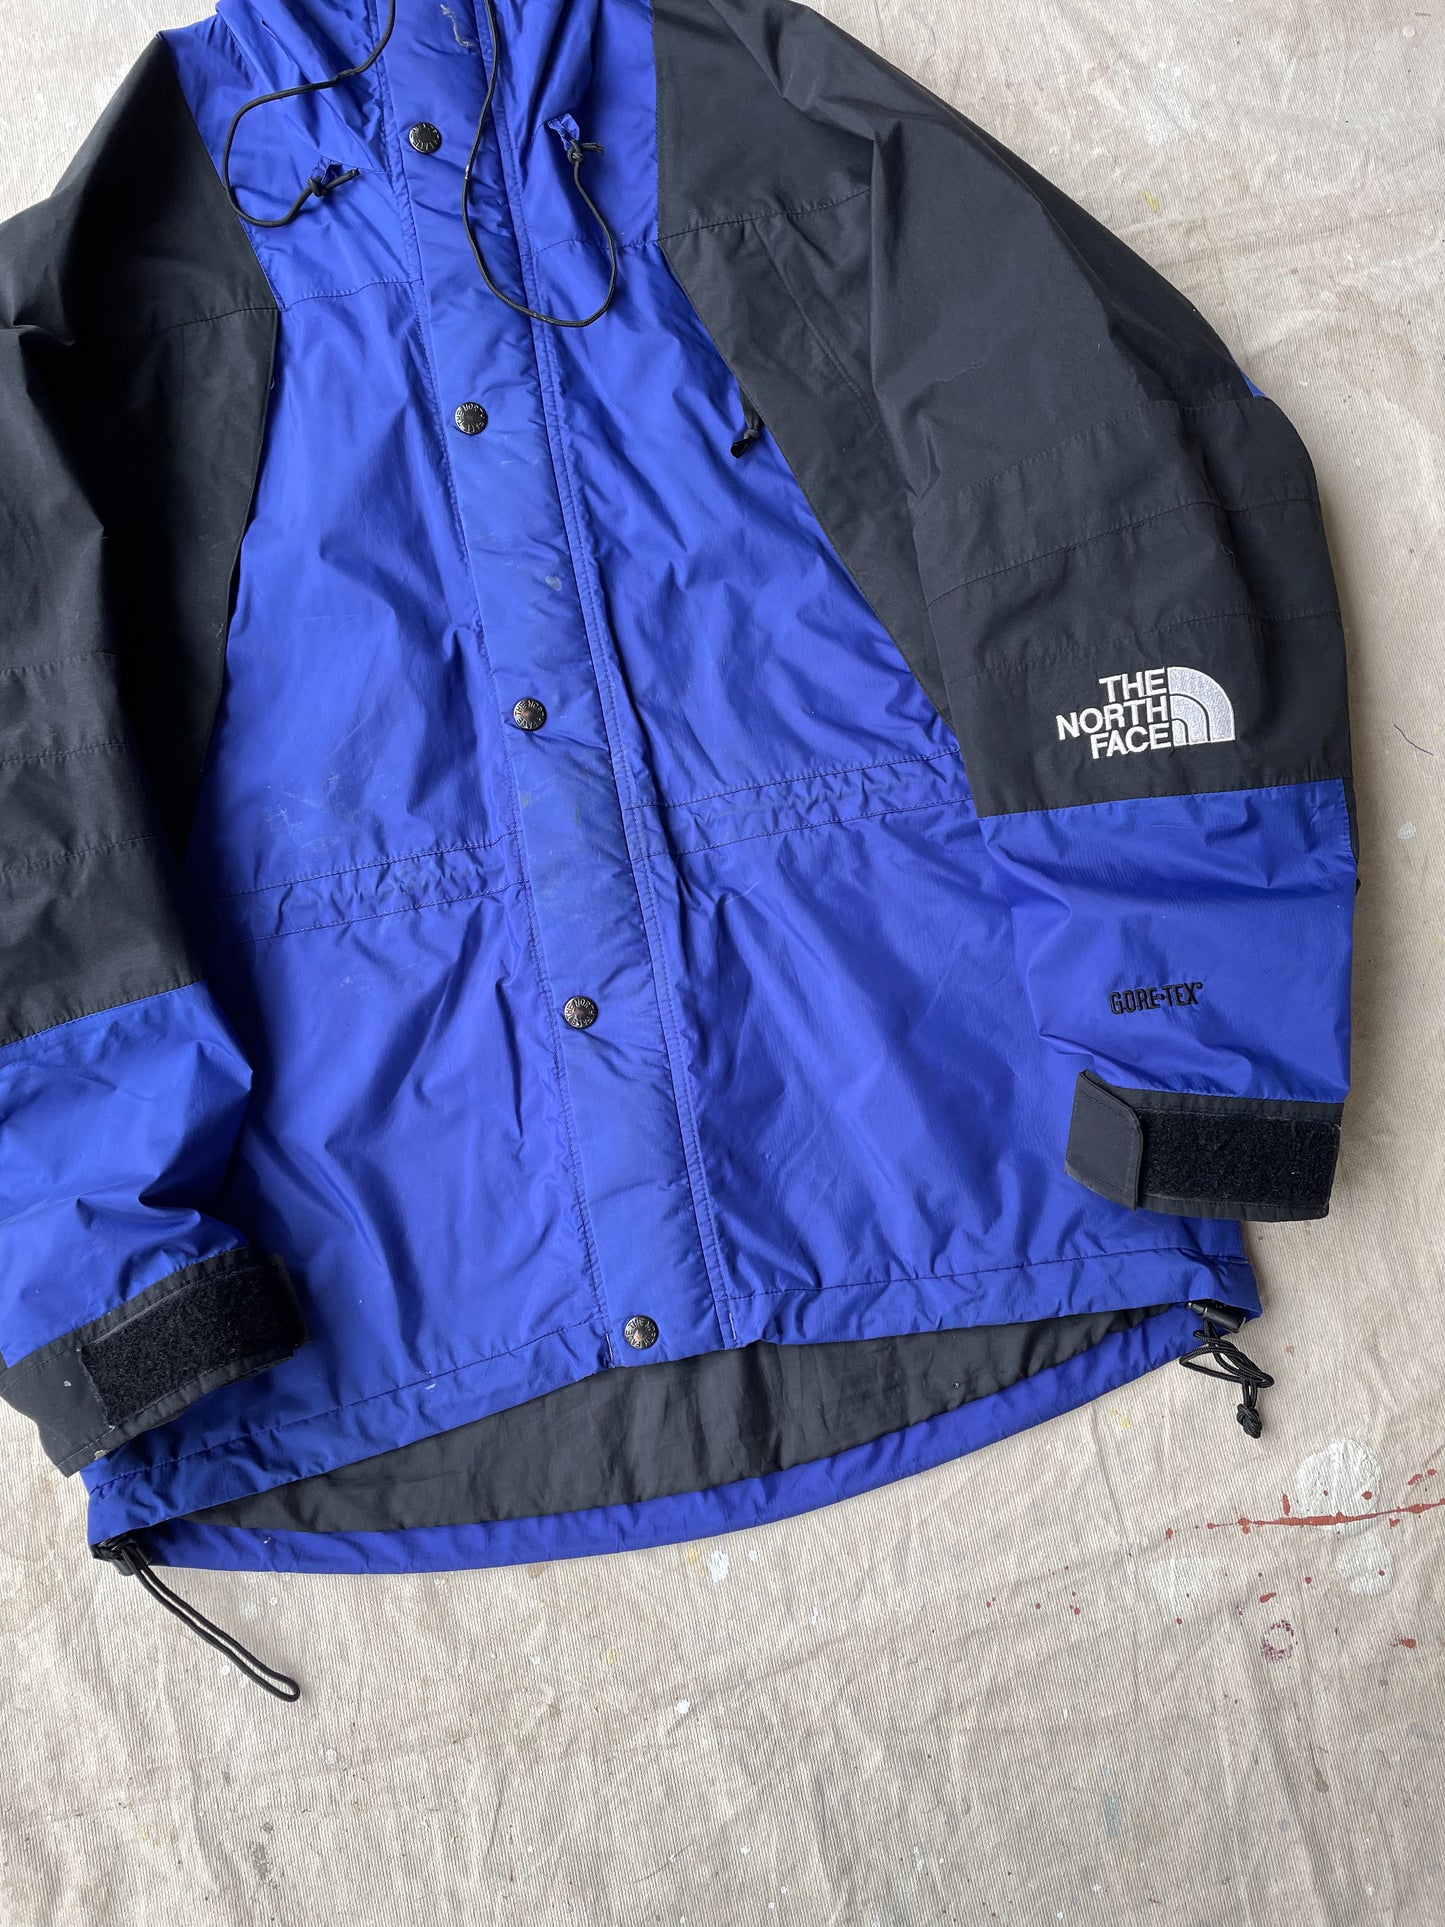 THE NORTH FACE JACKET—BLUE [S]